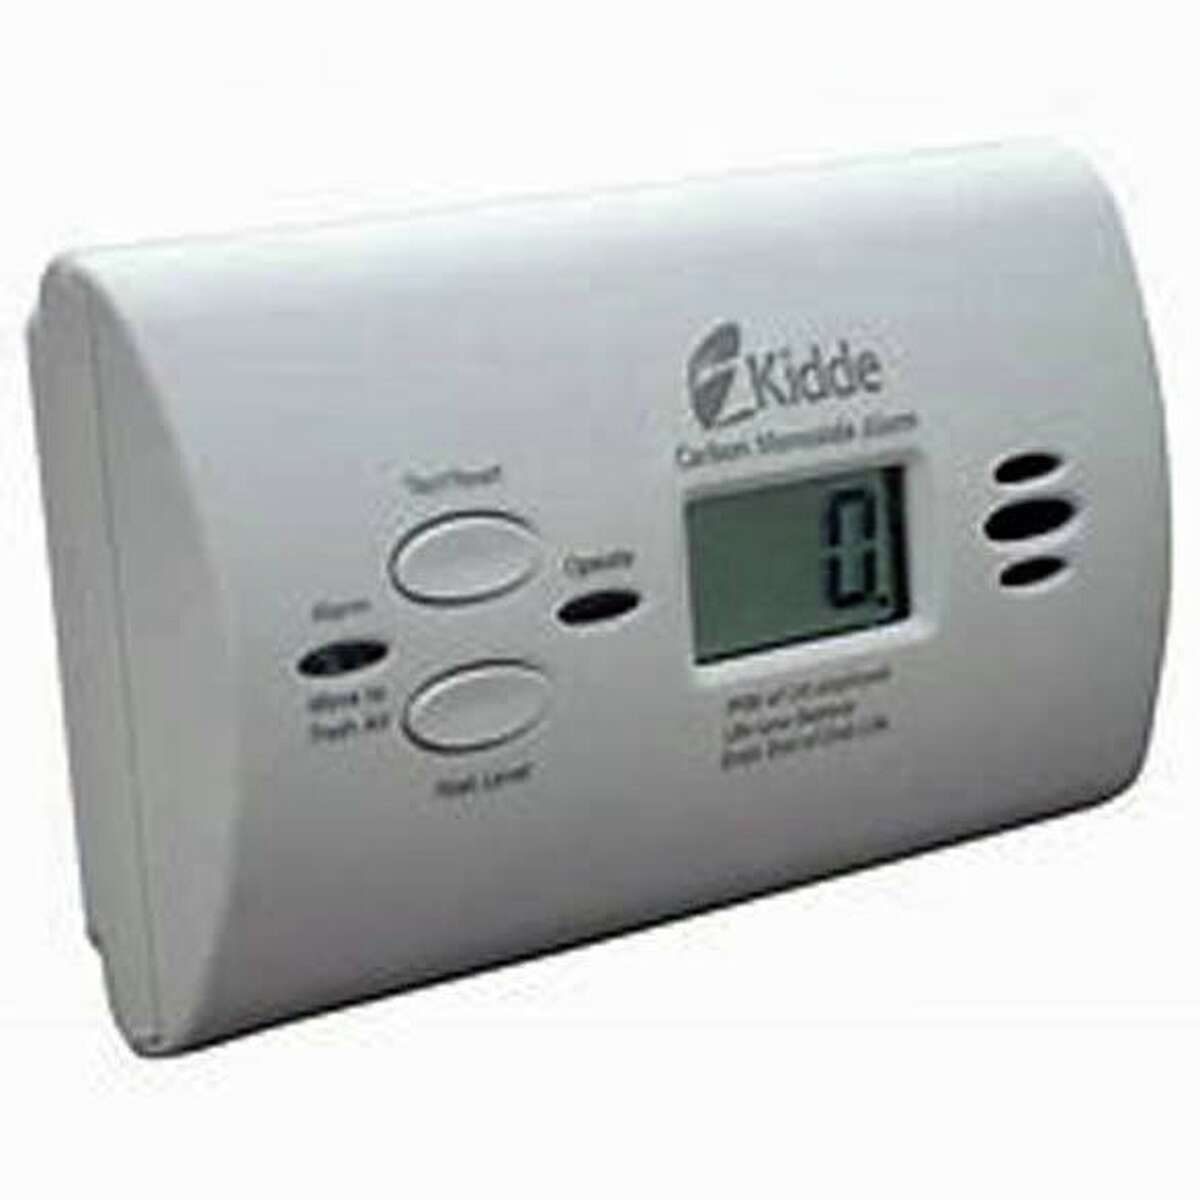 An image of a carbon monoxide detector, provided by the Bridgeport Fire Department.